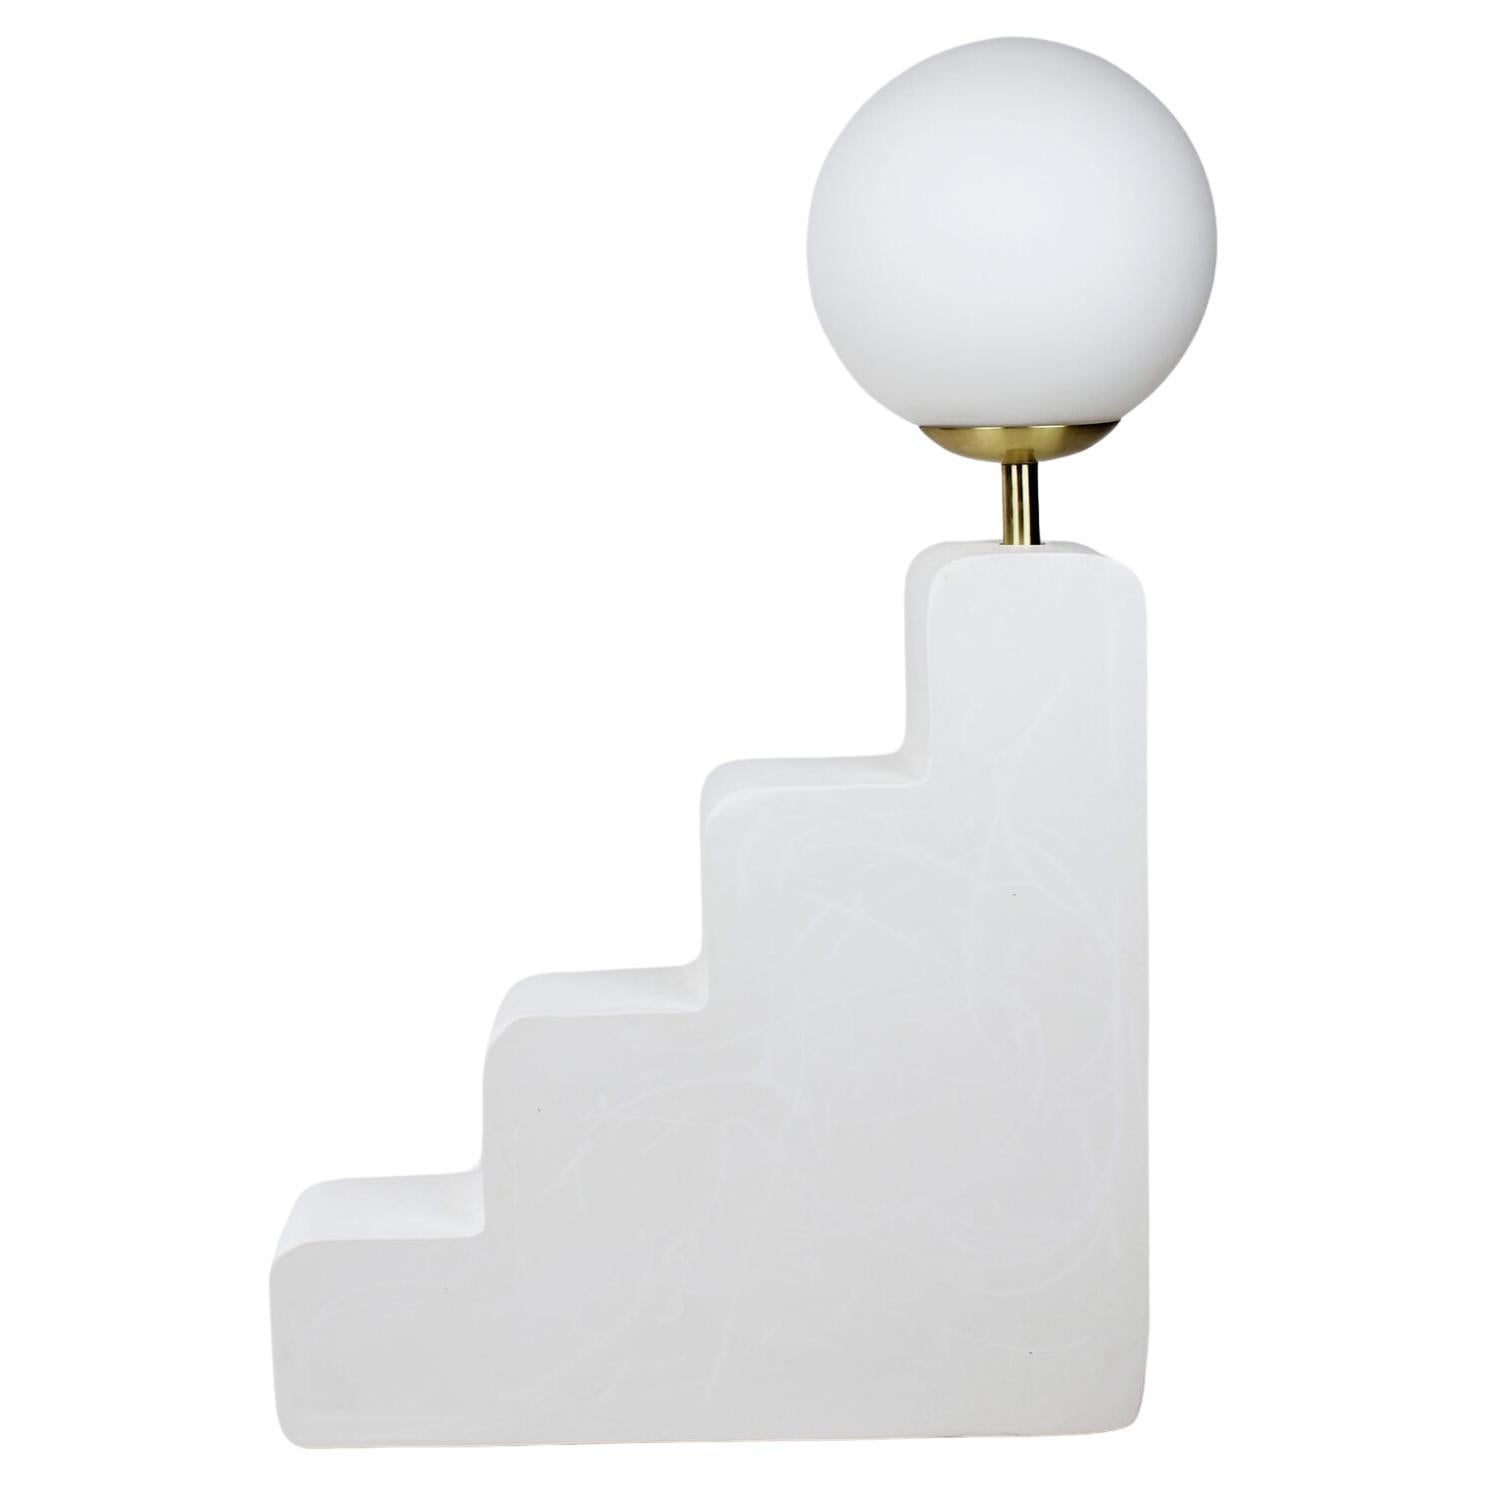 Contemporary Table Lamp in Gypsum / Collectible Design "Step Lamp"  by AOAO